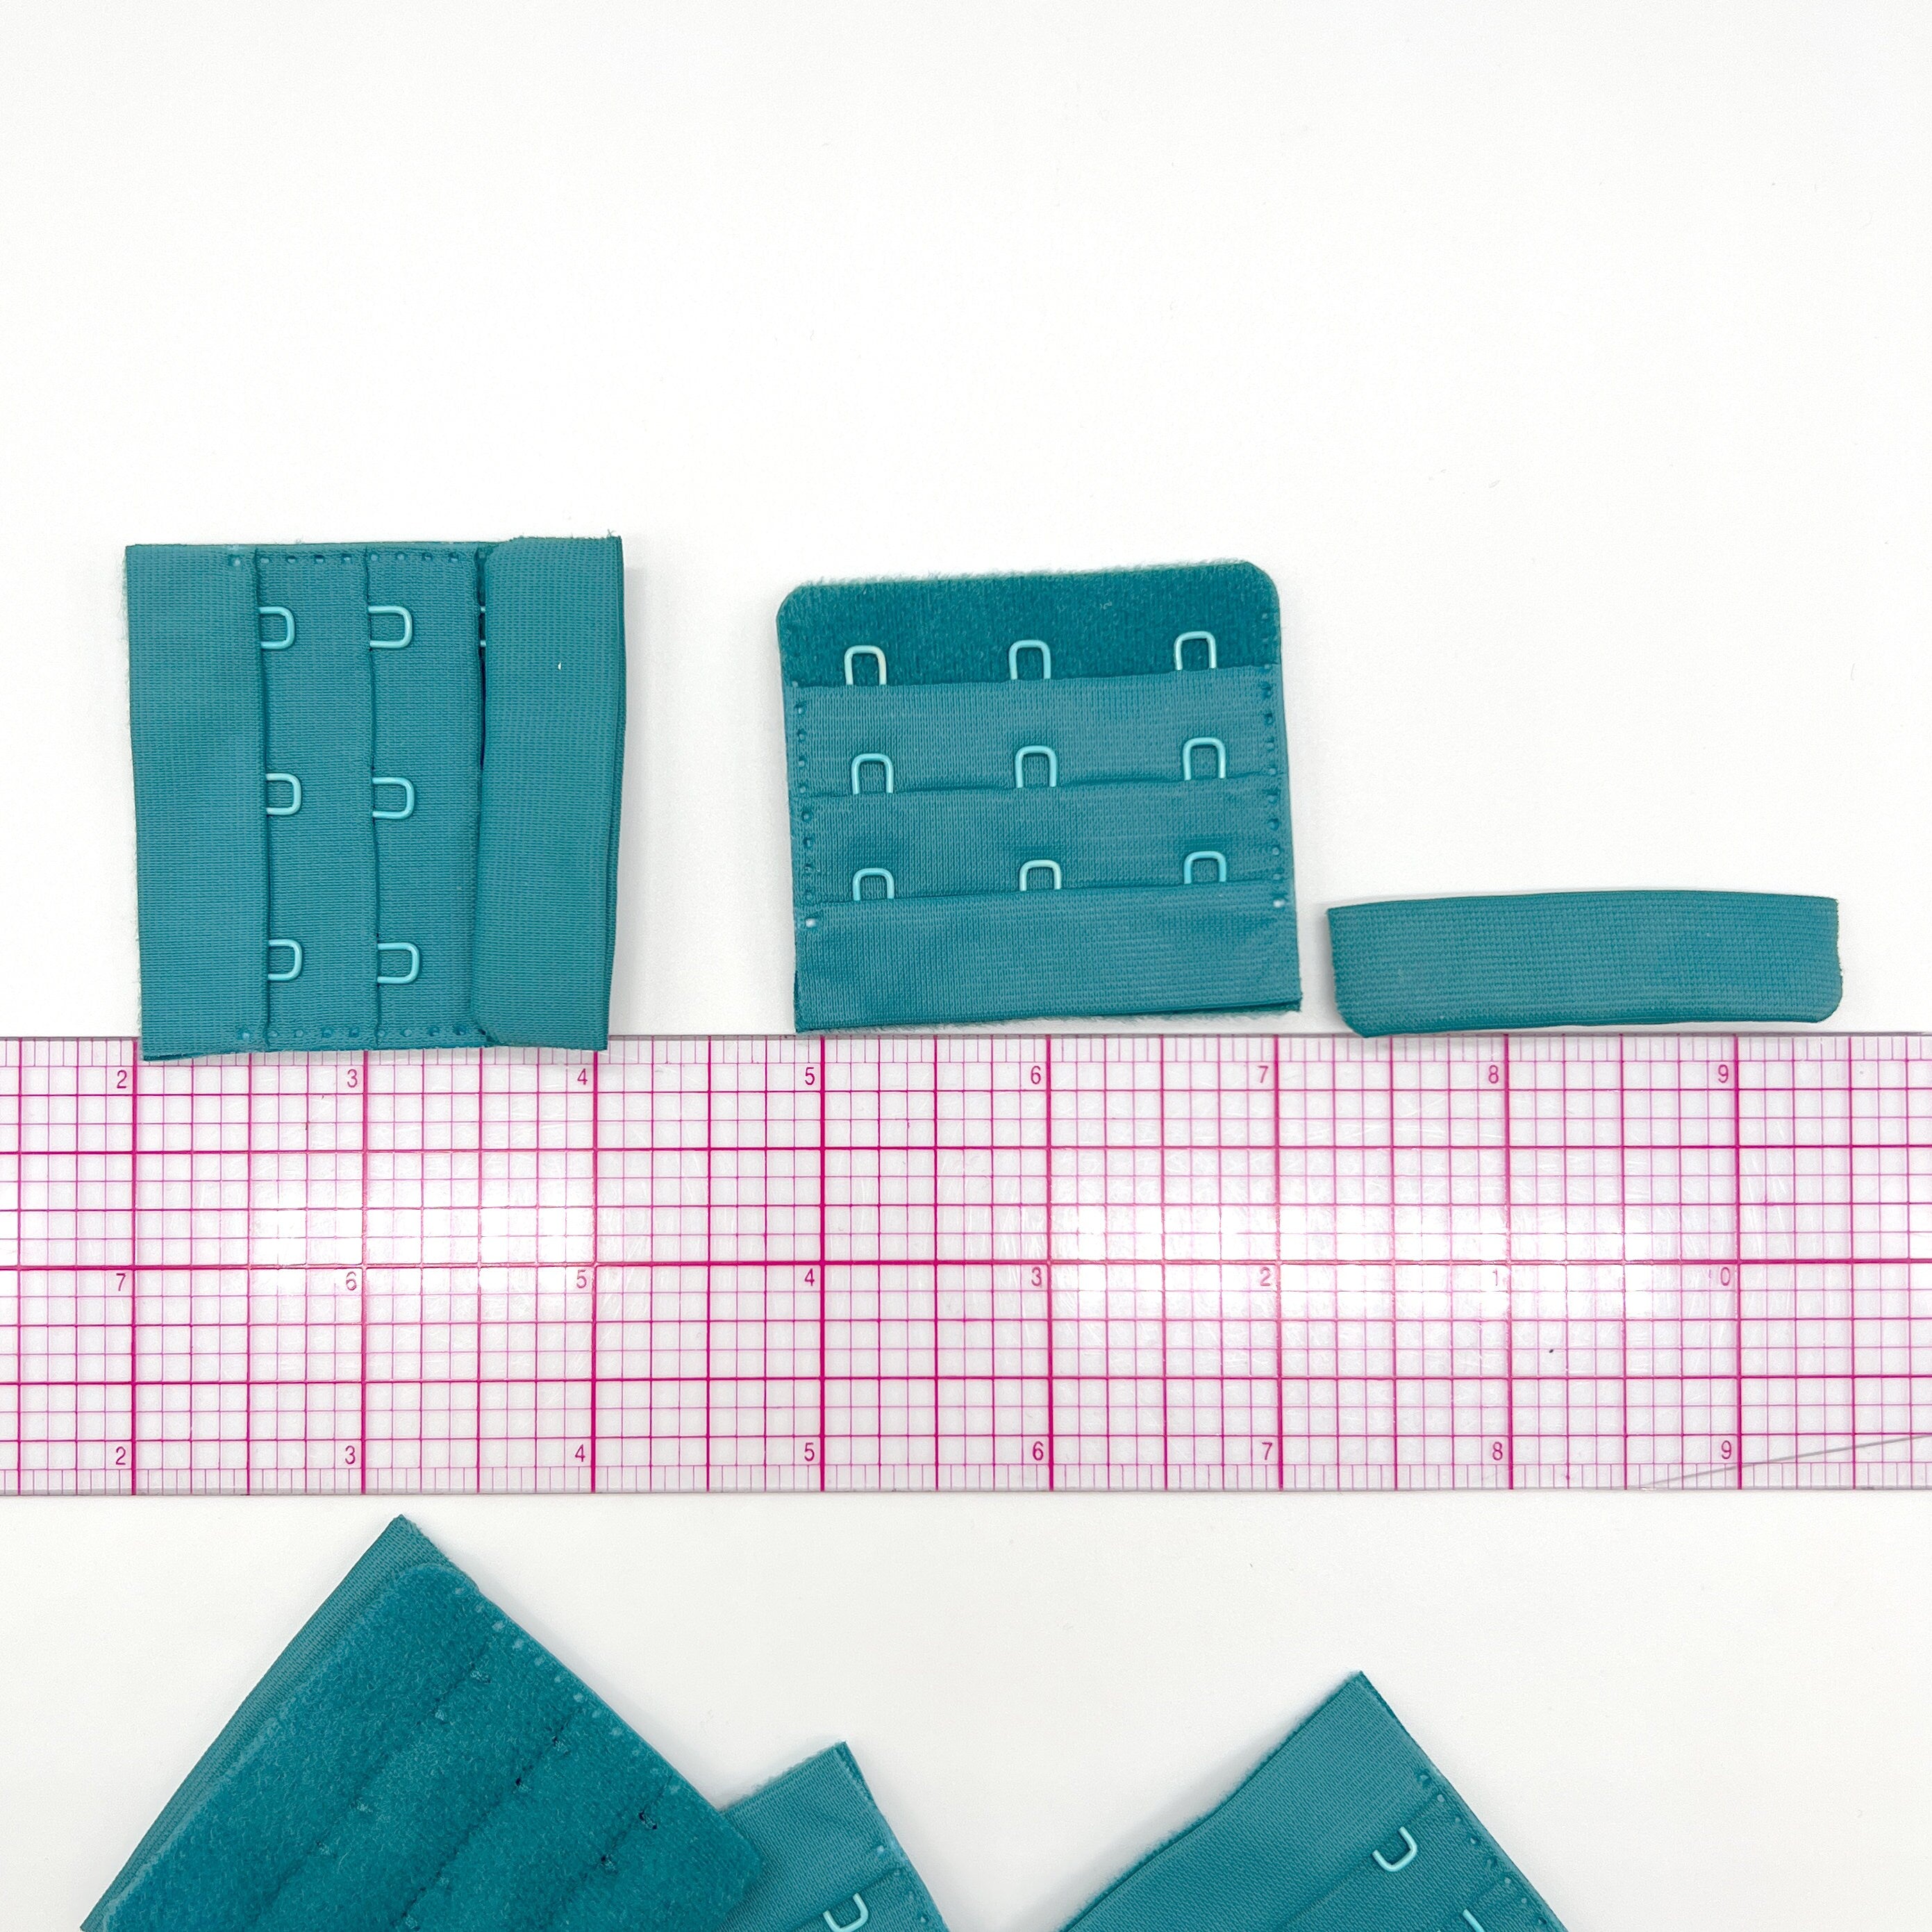 CLEARANCE Set of 5– 3x3 Teal Hook and Eyes for Bra and Bralette Making - Stitch Love Studio